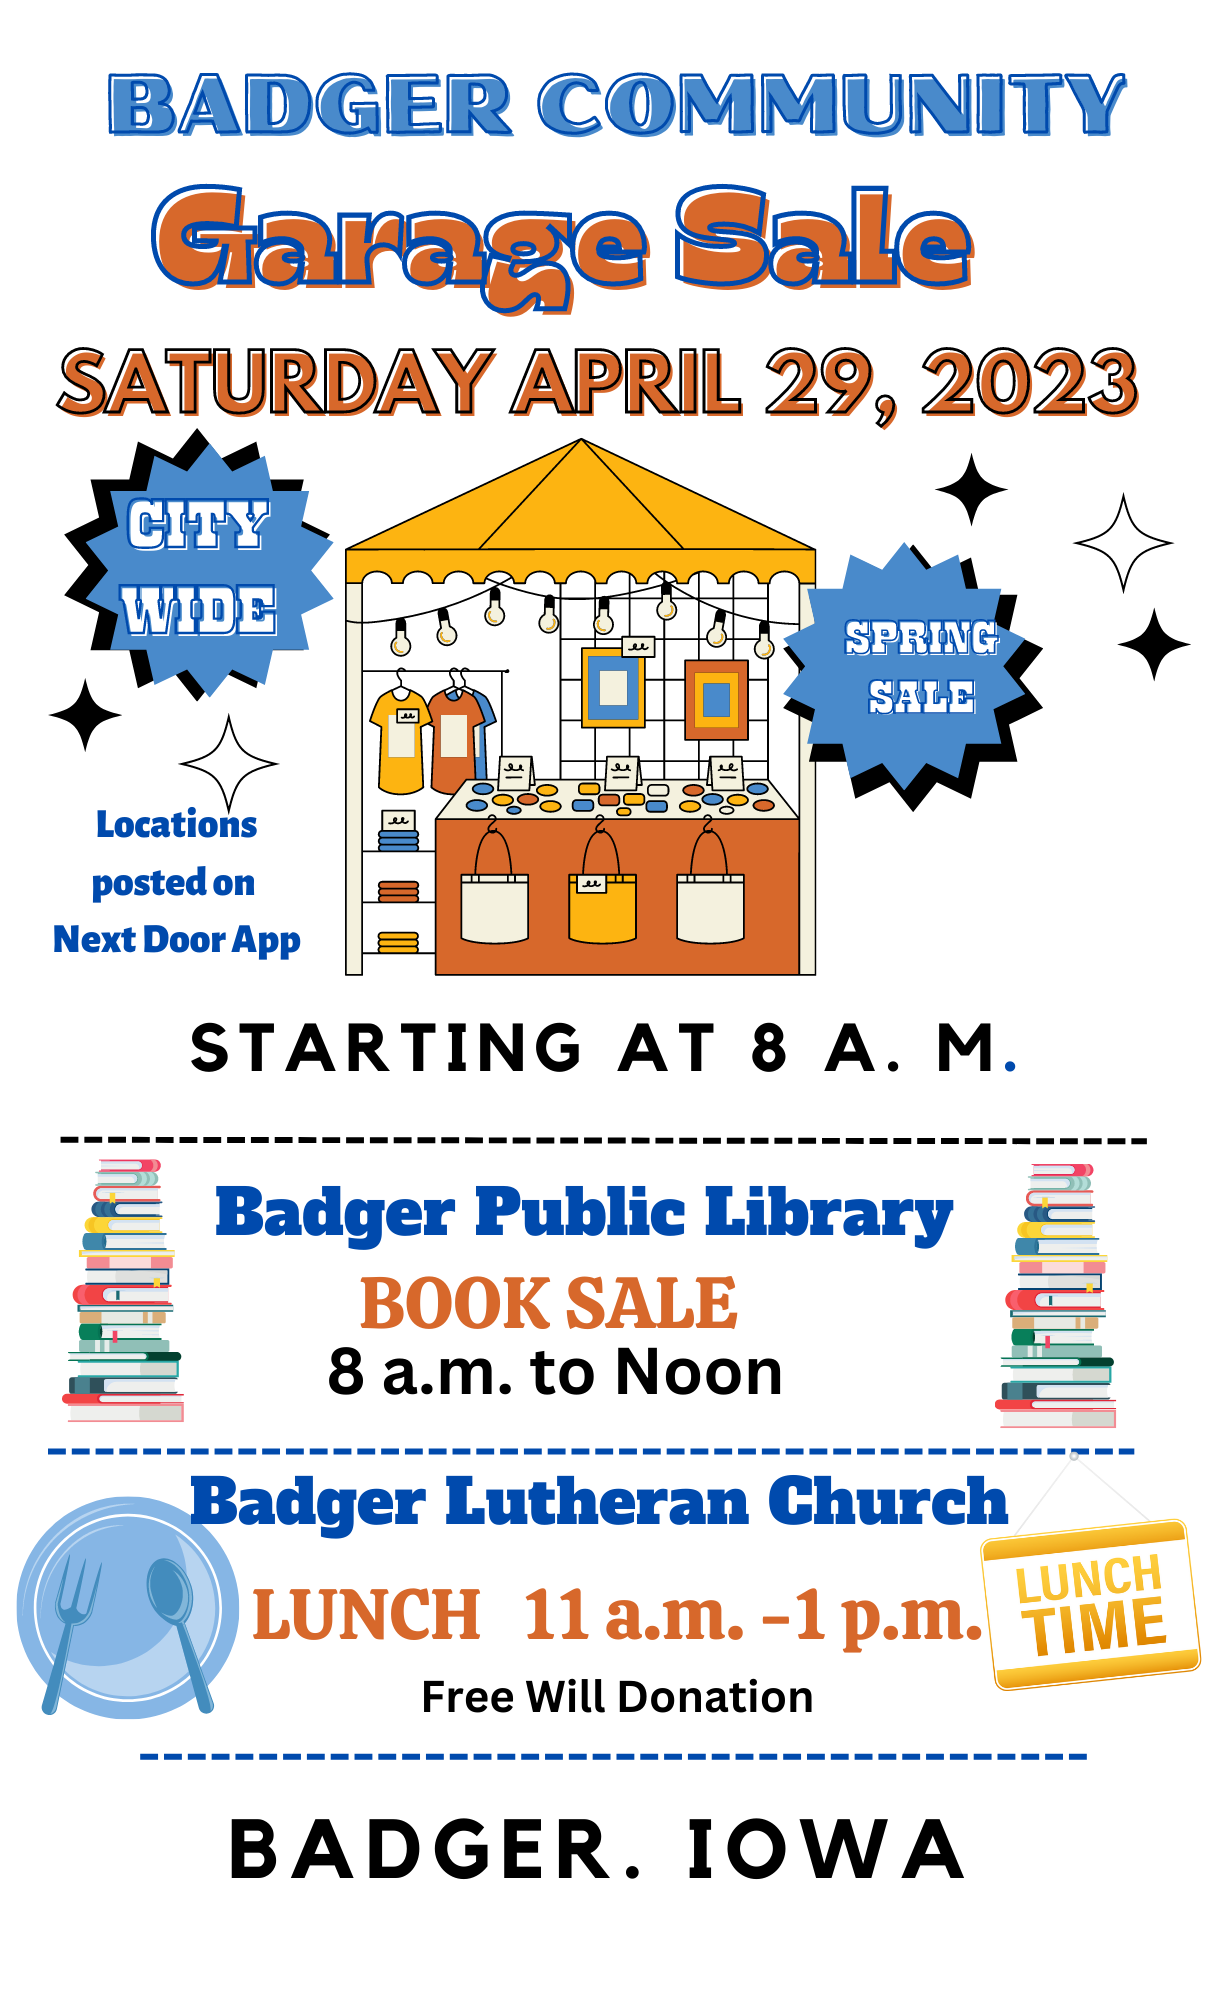 <h1 class="tribe-events-single-event-title">Badger Community Garage Sale, Book Sale and Free Will Luncheon</h1>